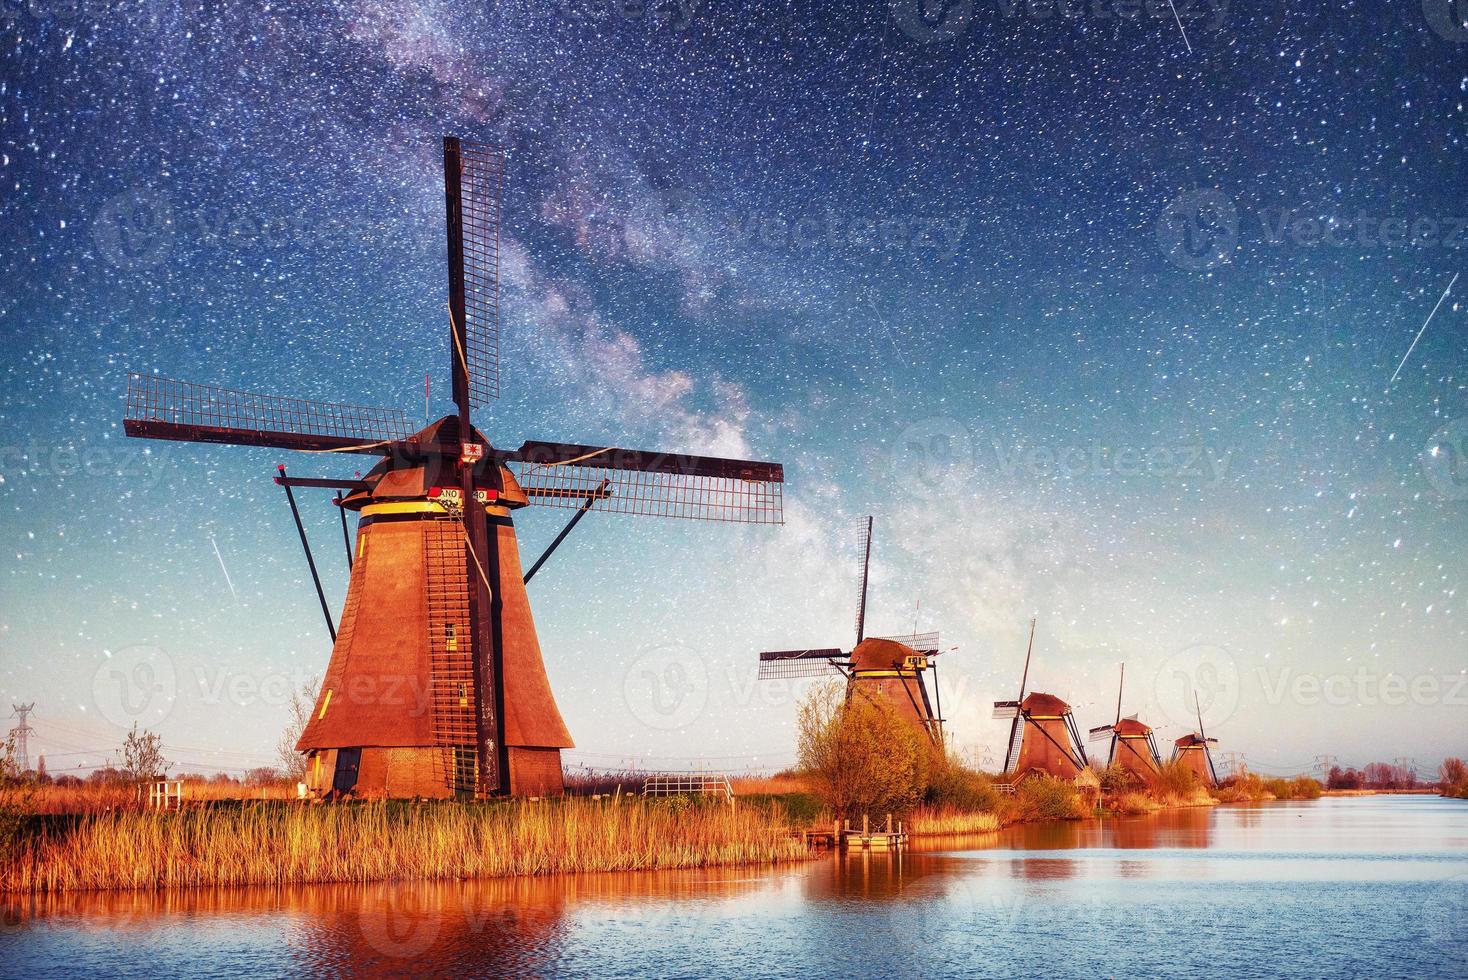 Colorful spring night with traditional Dutch windmills canal in Rotterdam. Wooden pier near the lake shore. Holland. Netherlands. Fantastic starry sky and the milky way photo